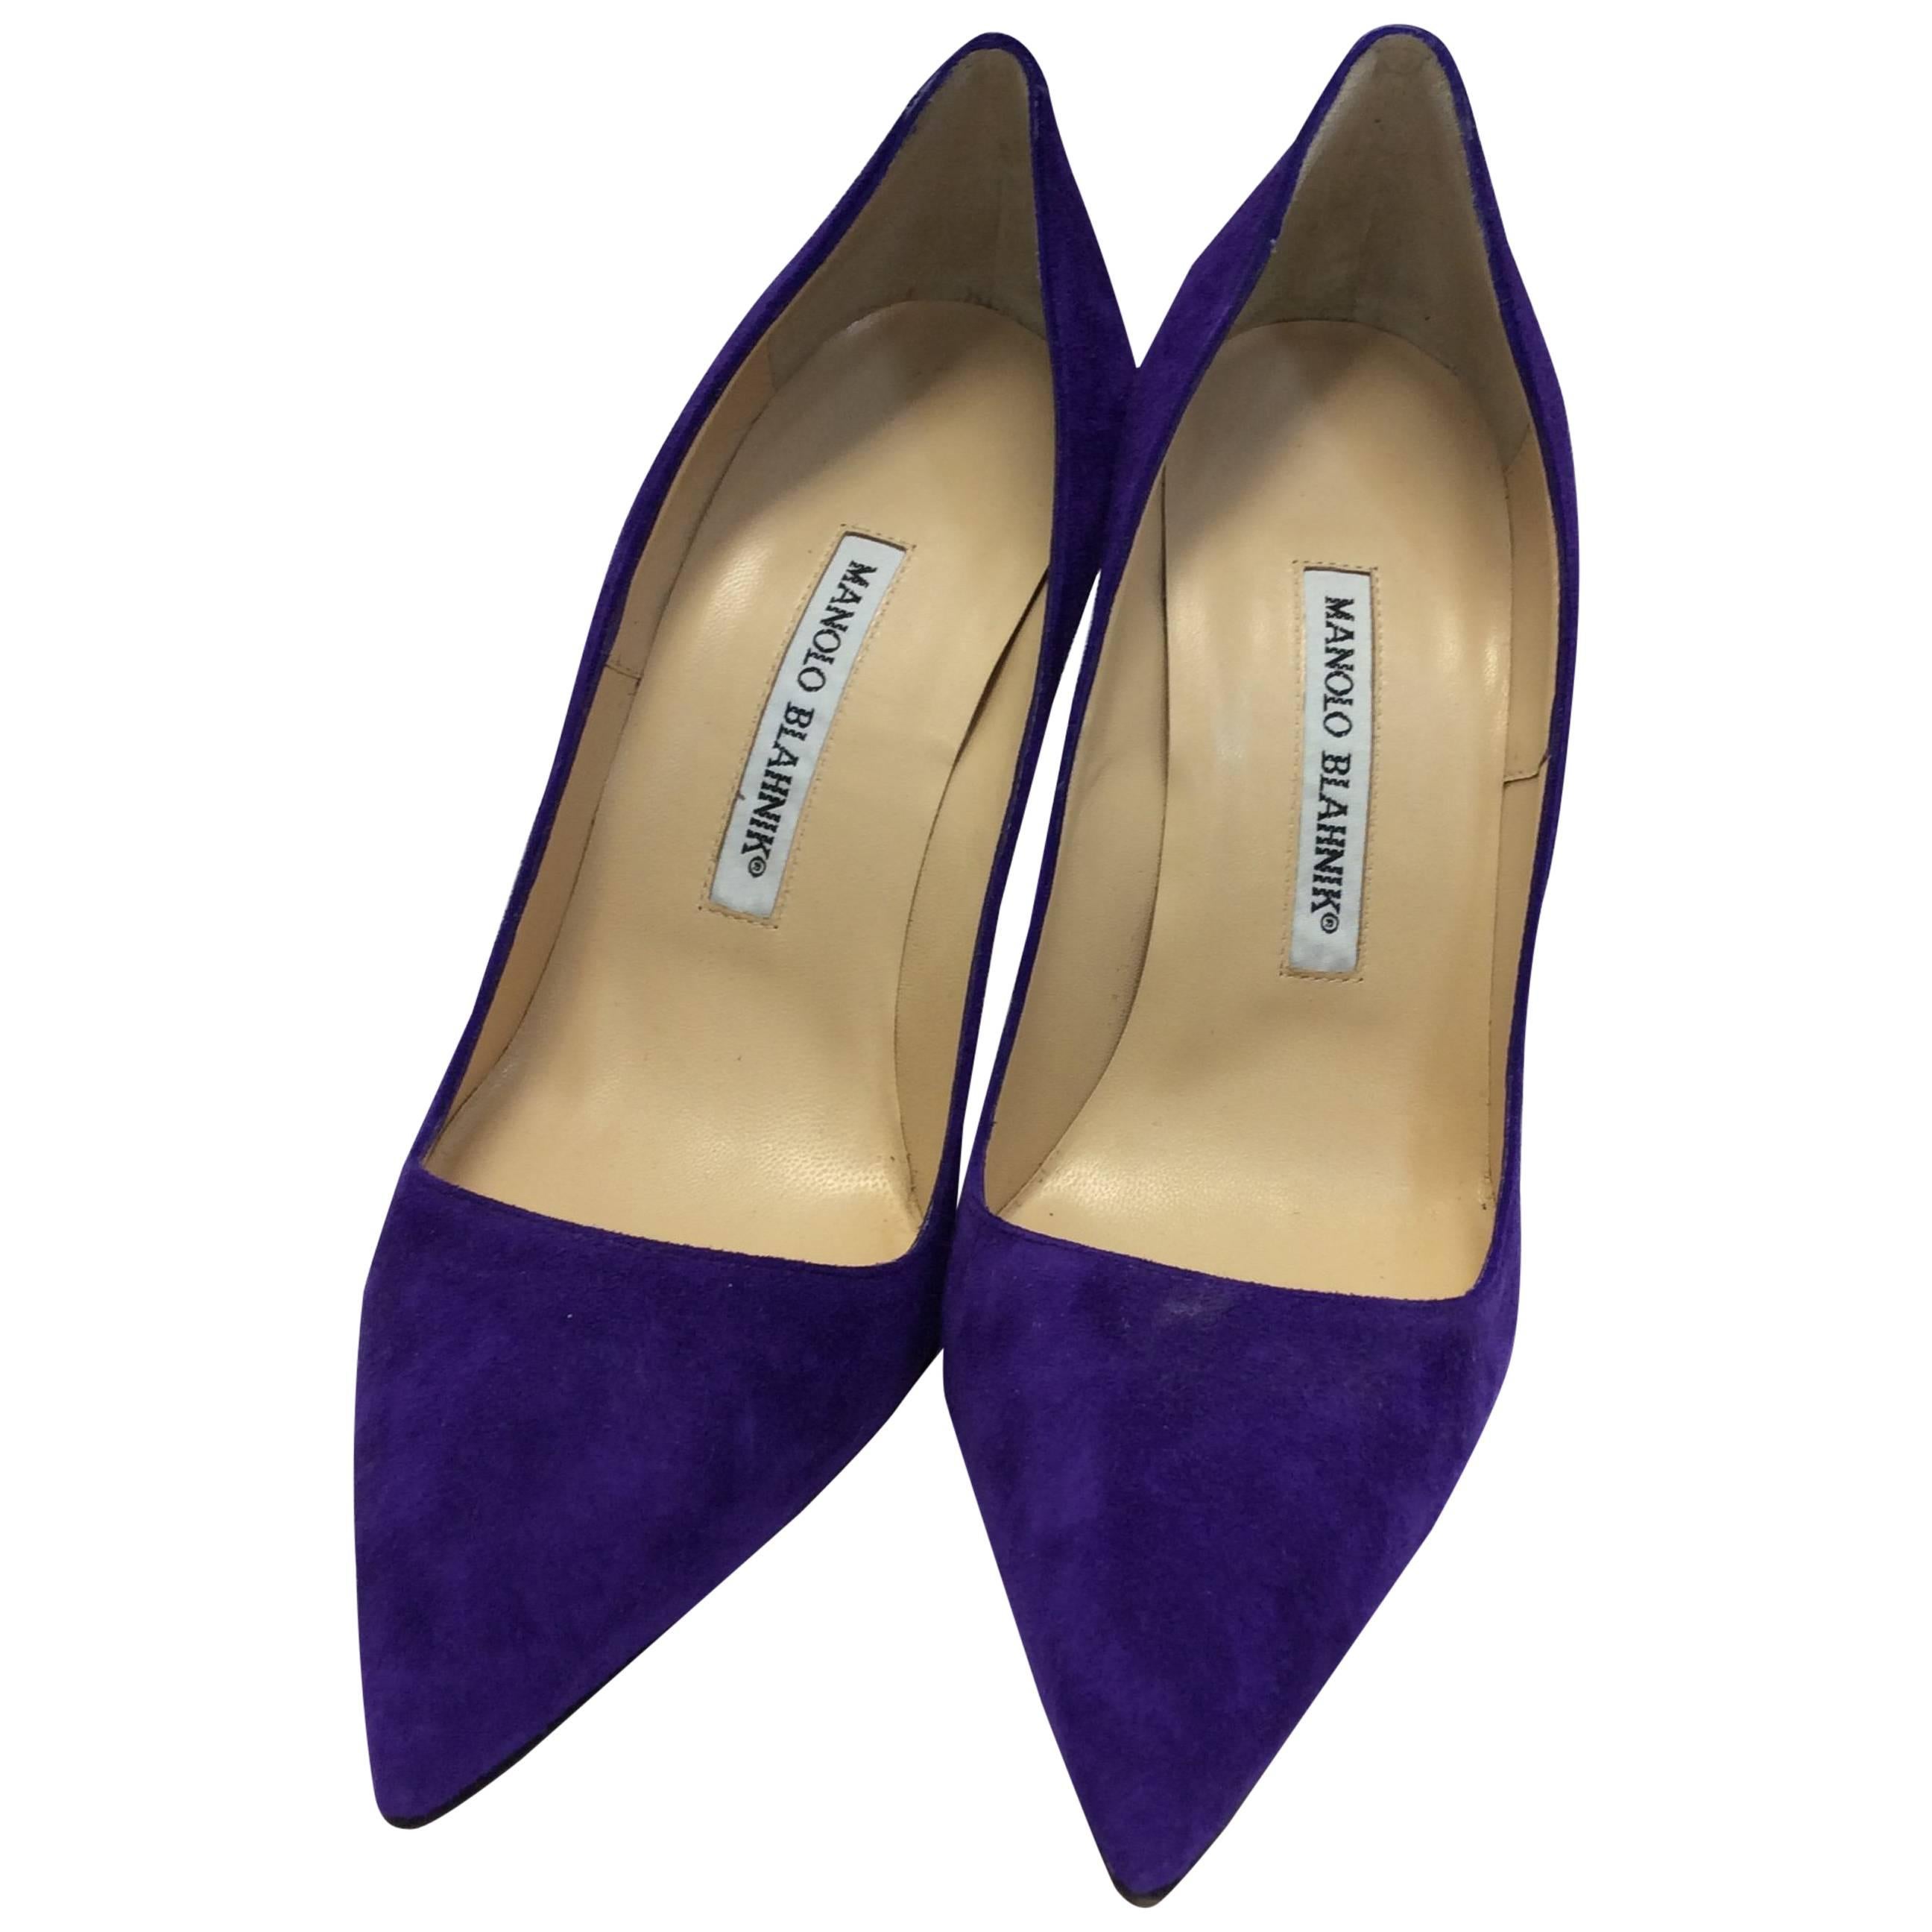 Manolo Blahnick New Purple Suede Pumps
Made in Italy
Size 37
4 inch heel
$476
